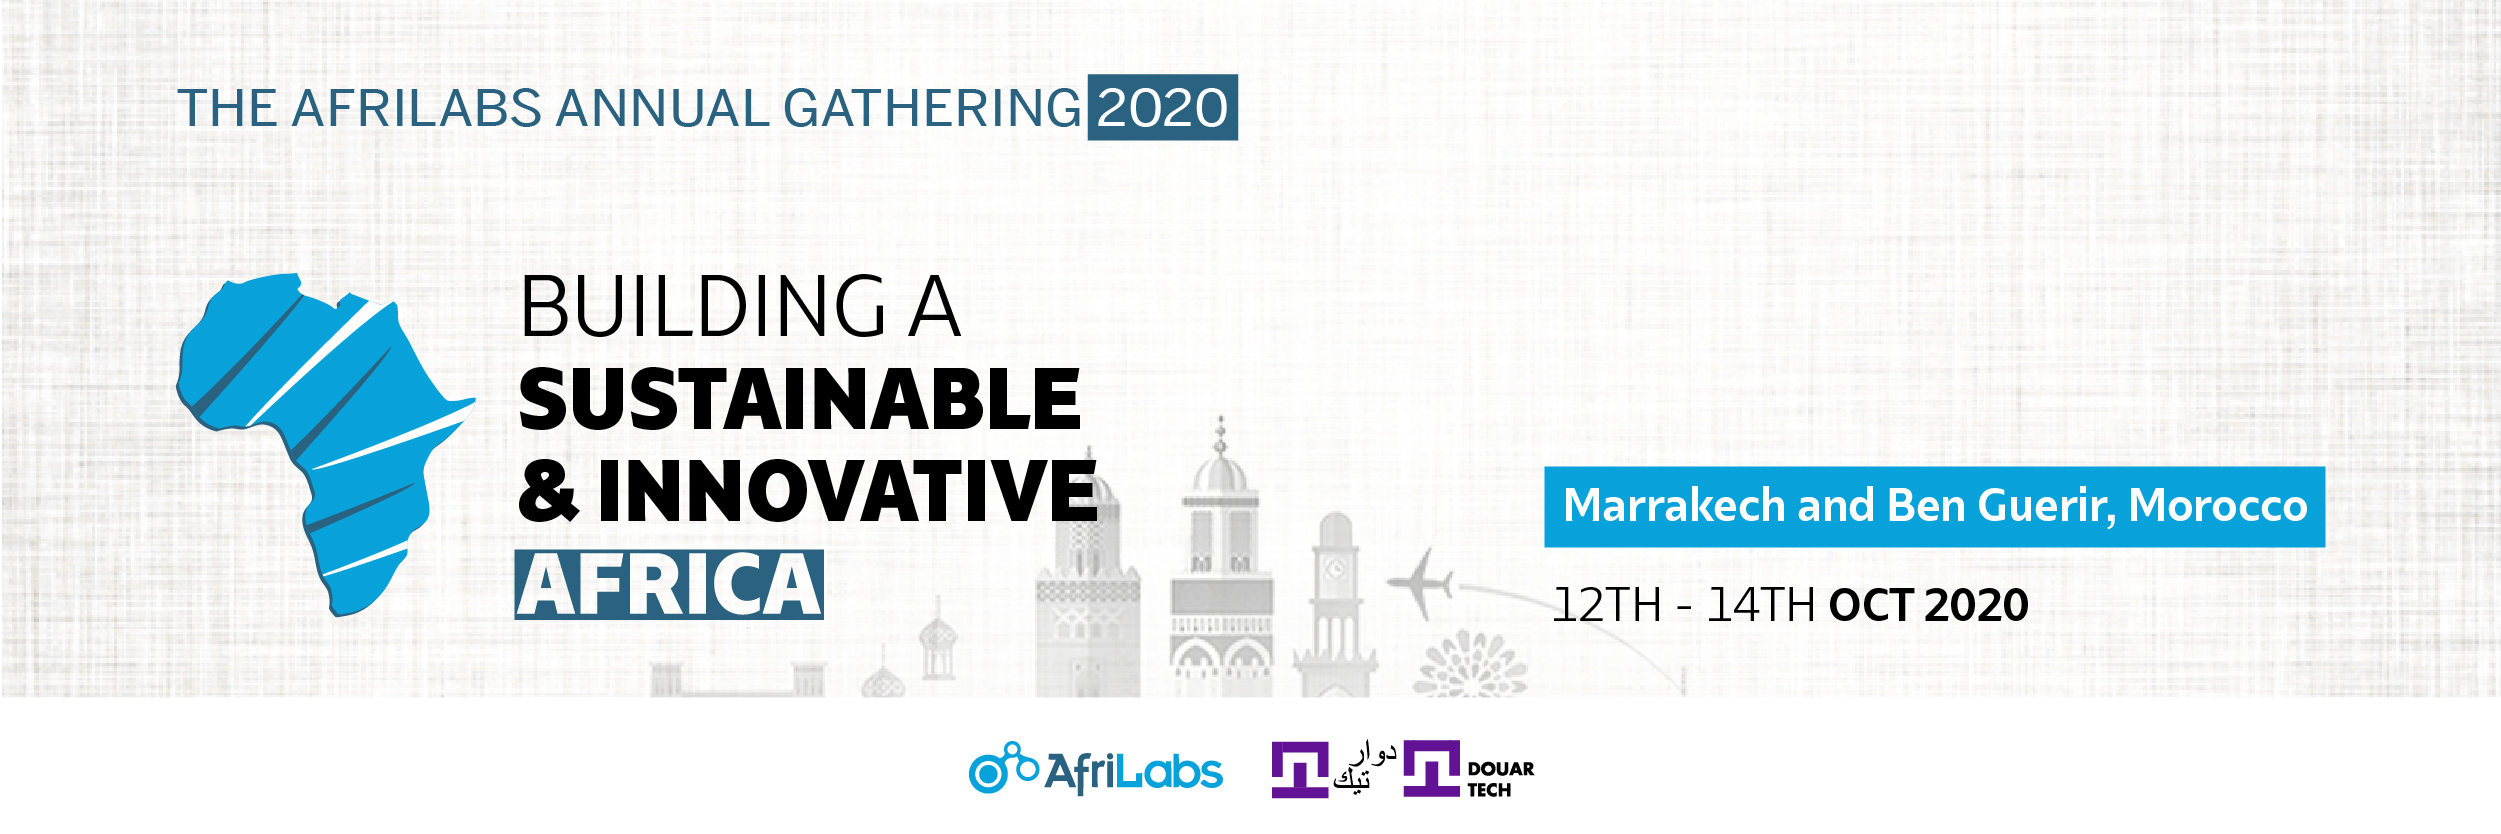 AfriLabs Annual Gathering 2020 to hold in Morocco with the theme “Building a Sustainable and Innovative Africa”